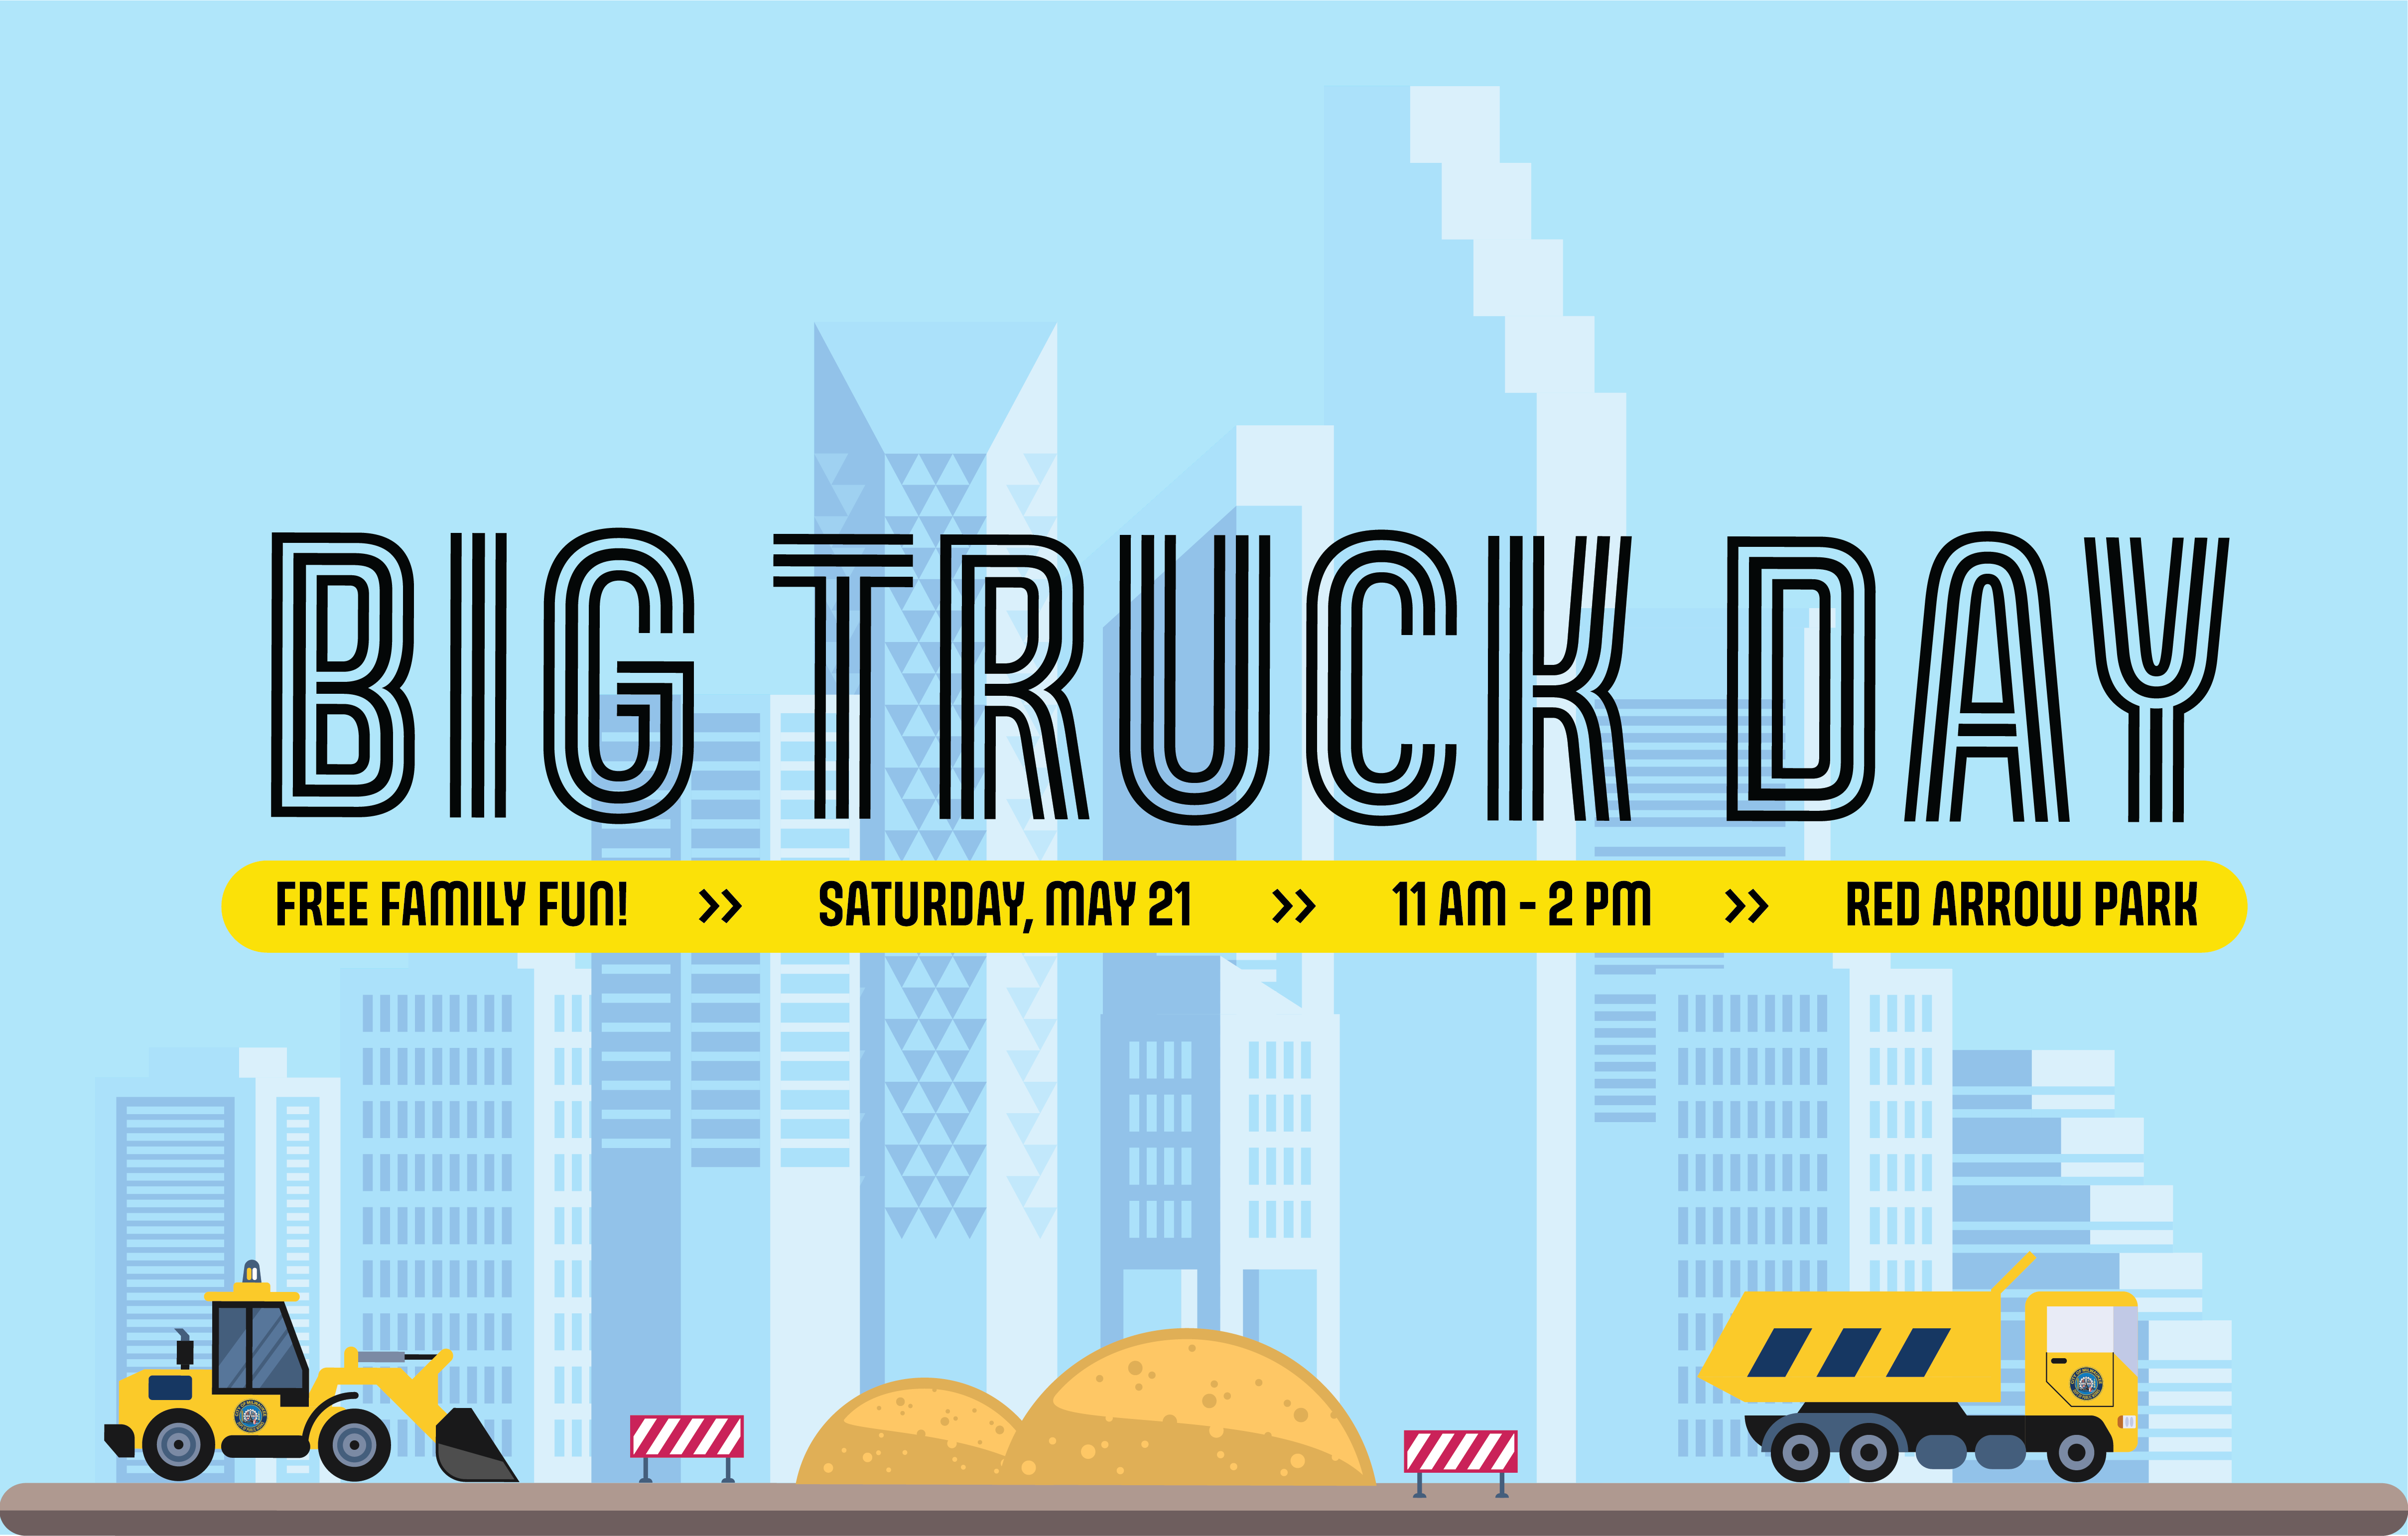 Get the Scoop on Big Truck Day, May 21 Blog Experience Milwaukee Downtown